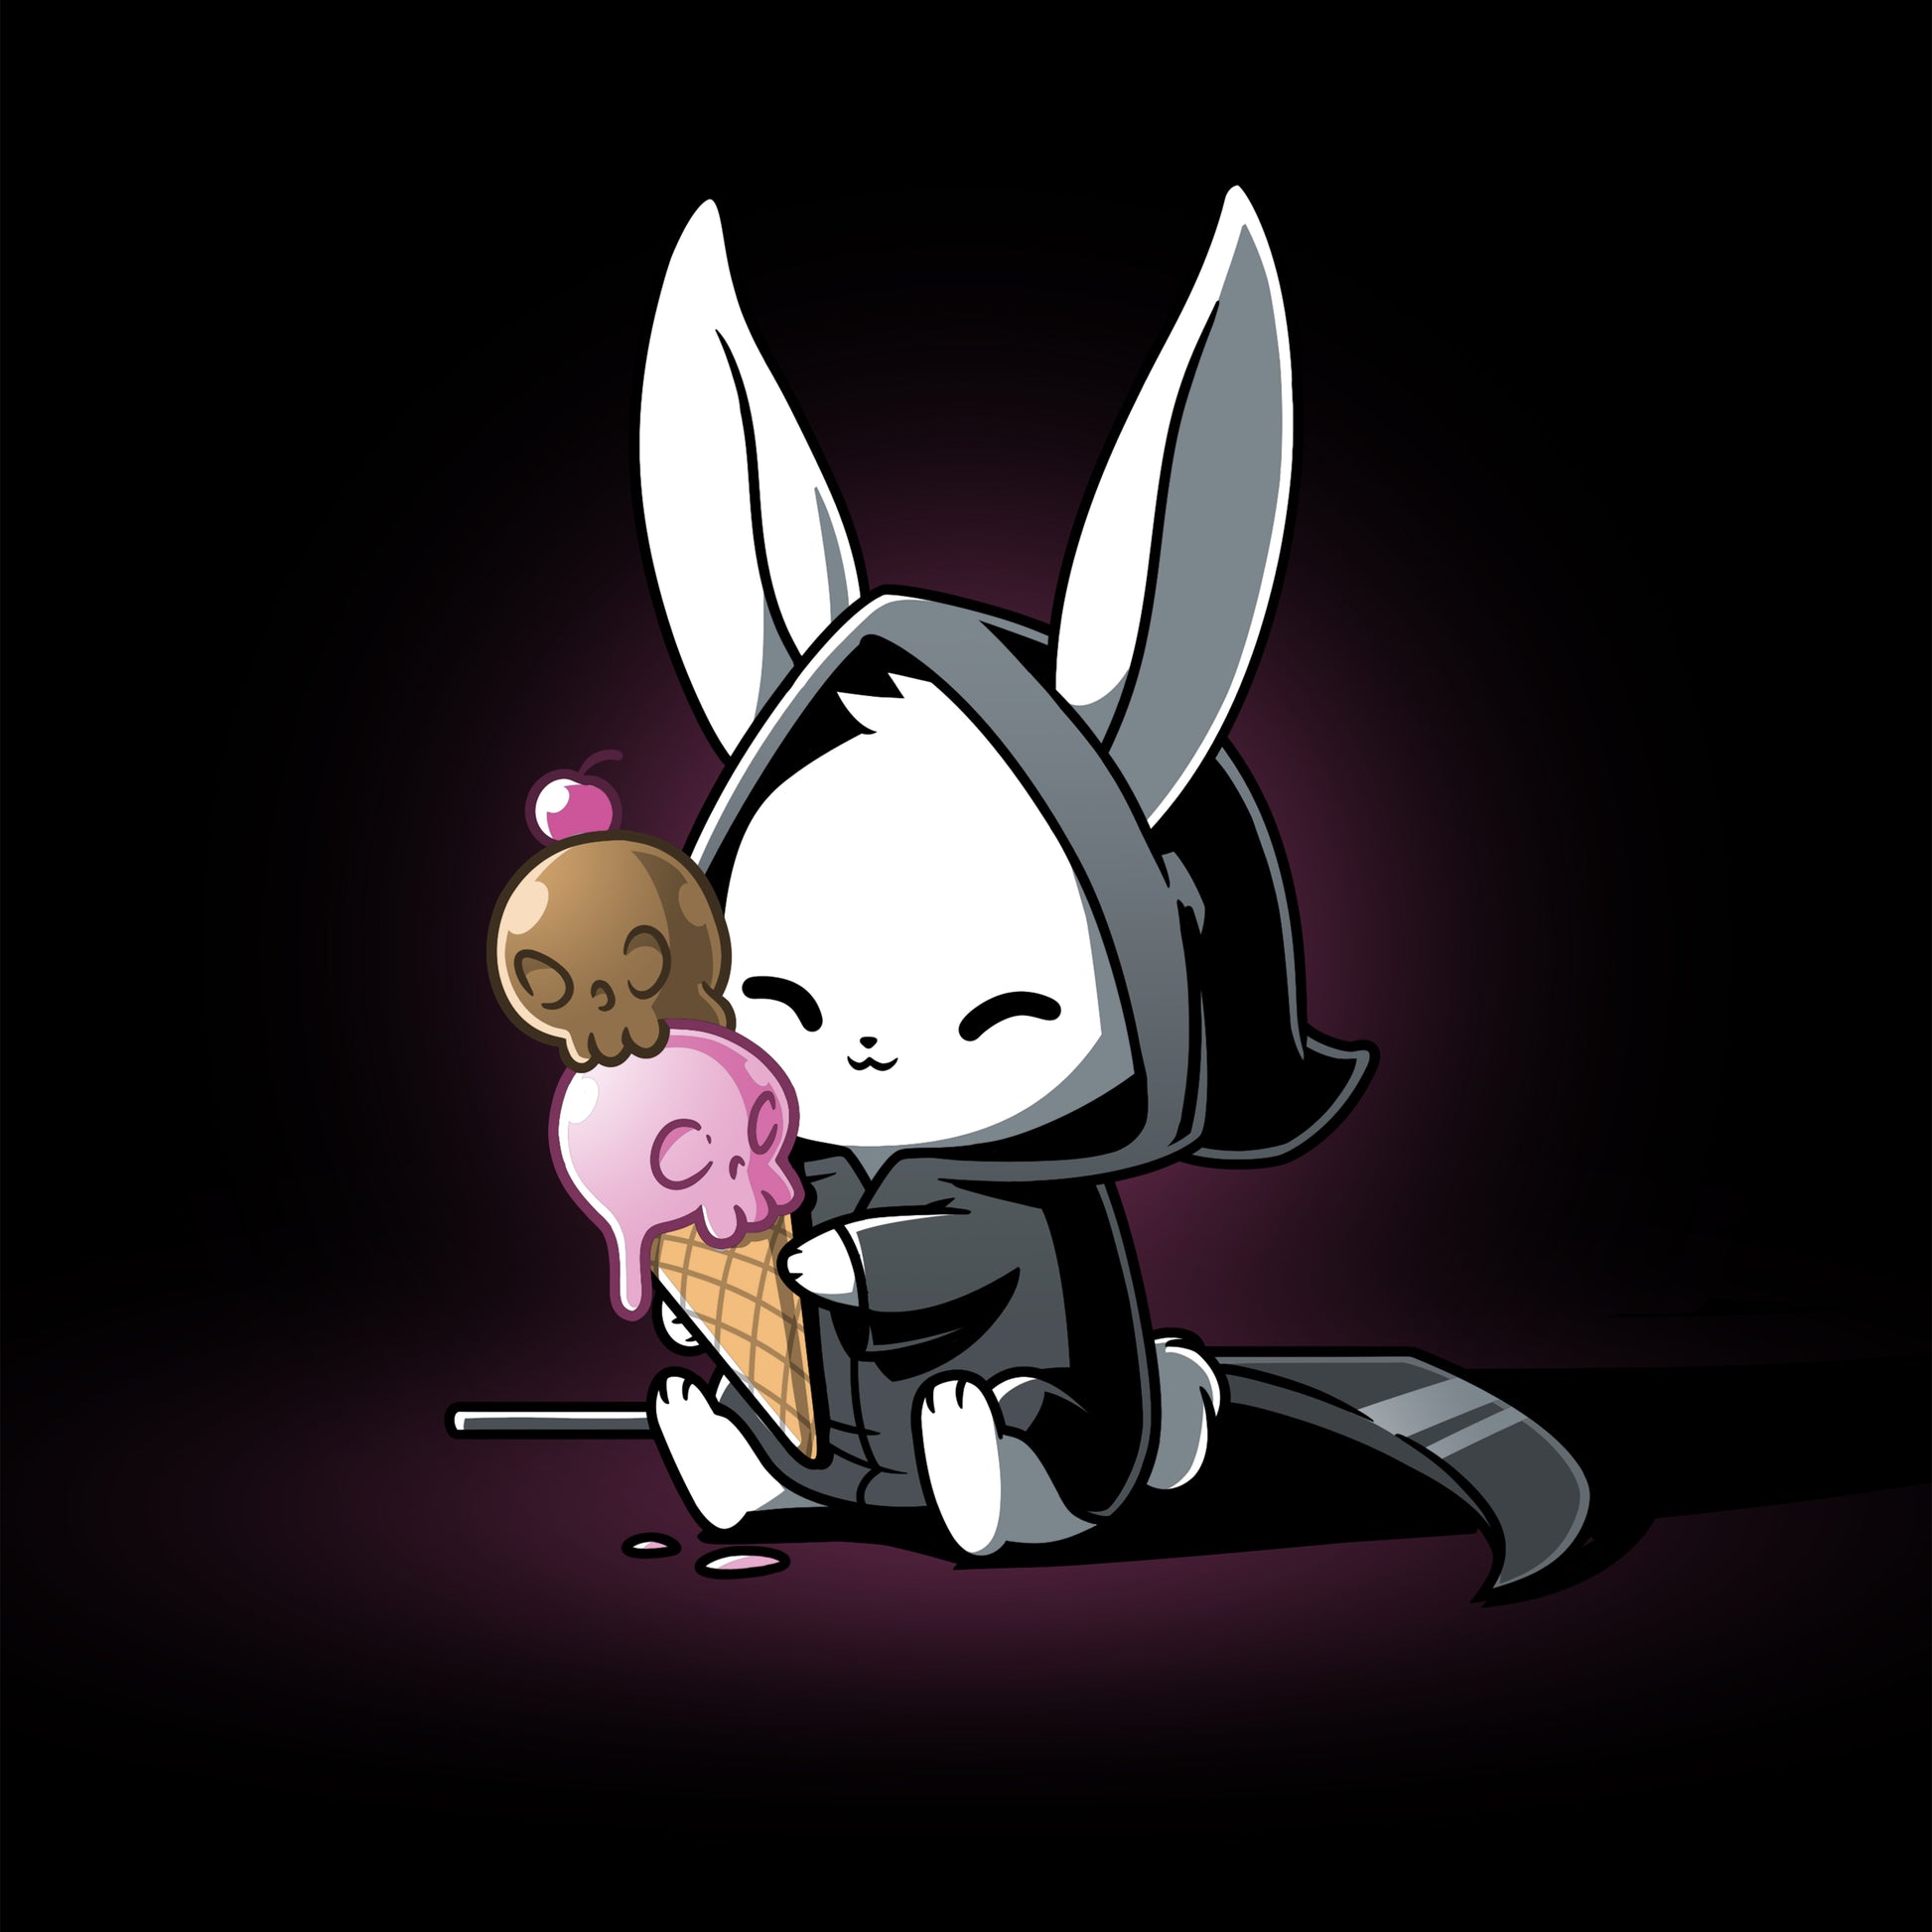 A TeeTurtle Death By Ice Cream featuring a bunny holding an ice cream cone on a dark background.